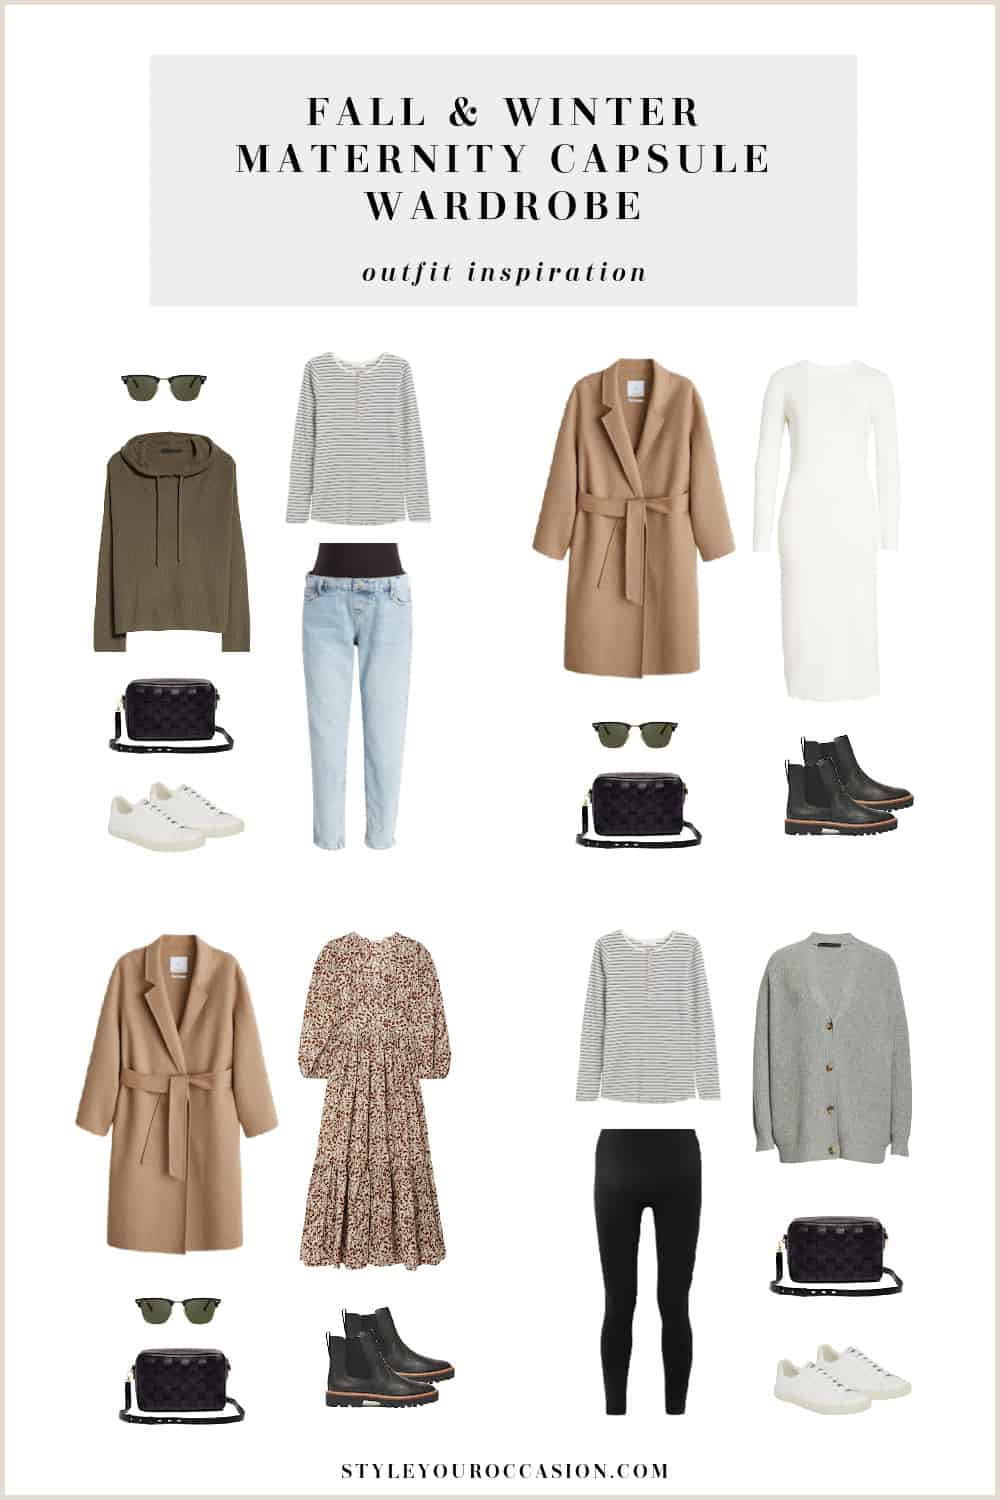 Pinterest collage of a maternity capsule wardrobe outfits for fall and winter with neutral clothing items, shoes, and accessories